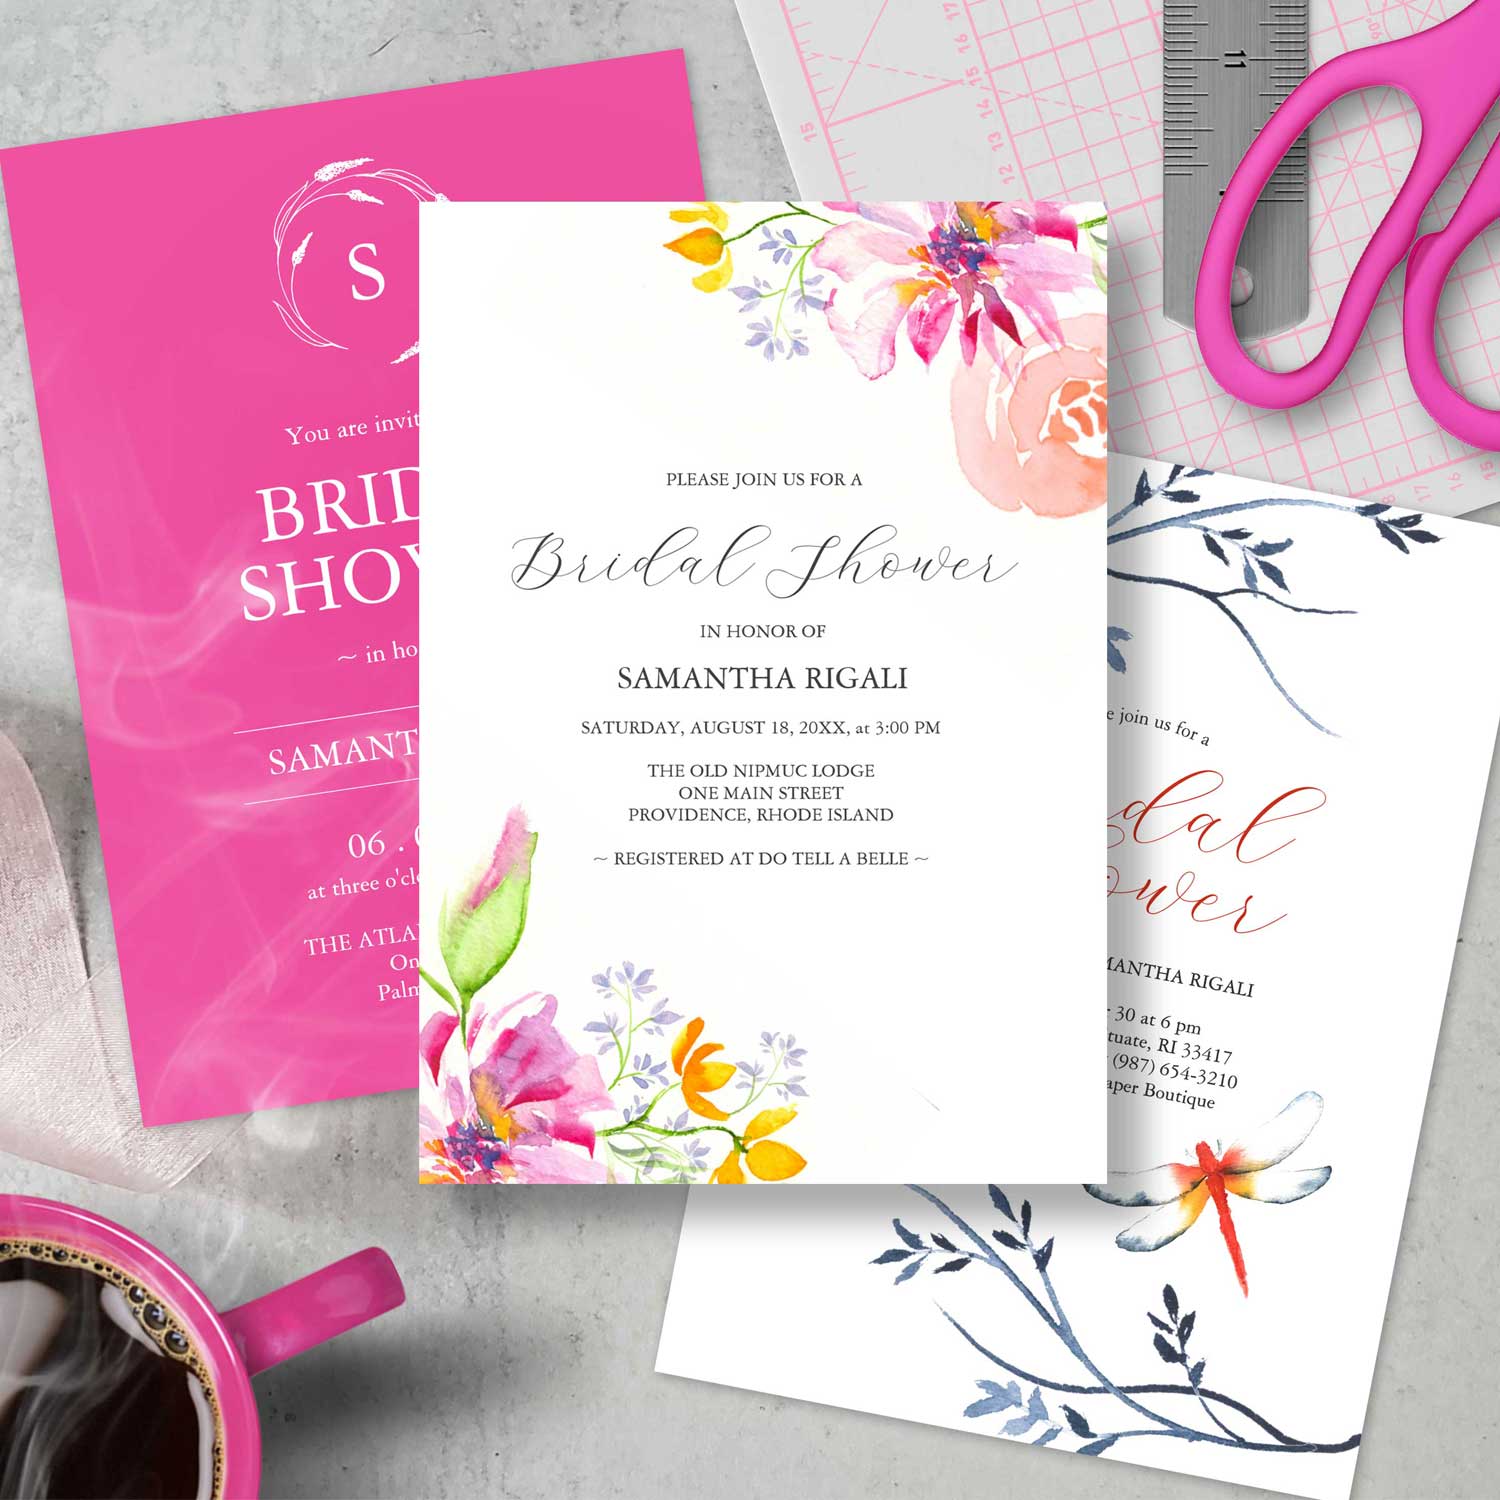 Assorted bridal shower invitations feature unique art by Victoria Grigaliunas of Do Tell A Belle.